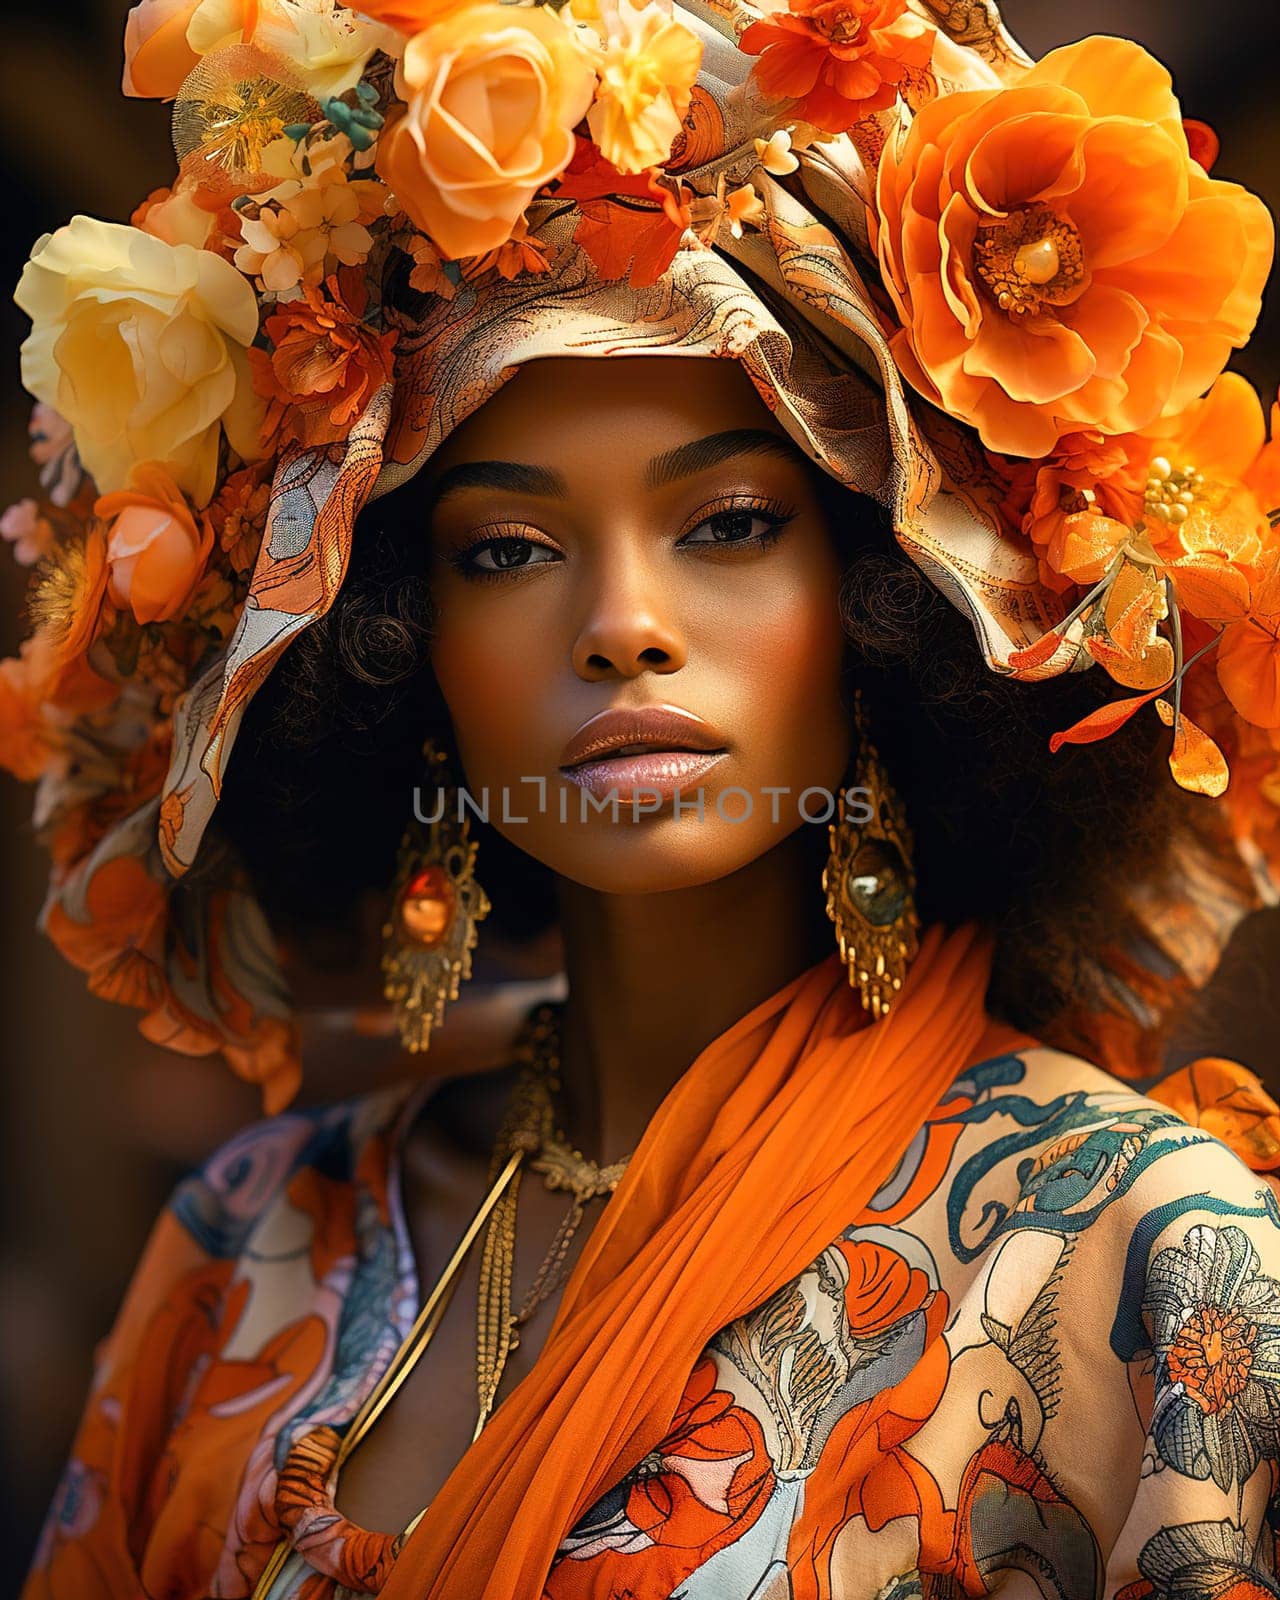 Beautiful, African-American woman in orange colors and clothes. High quality photo